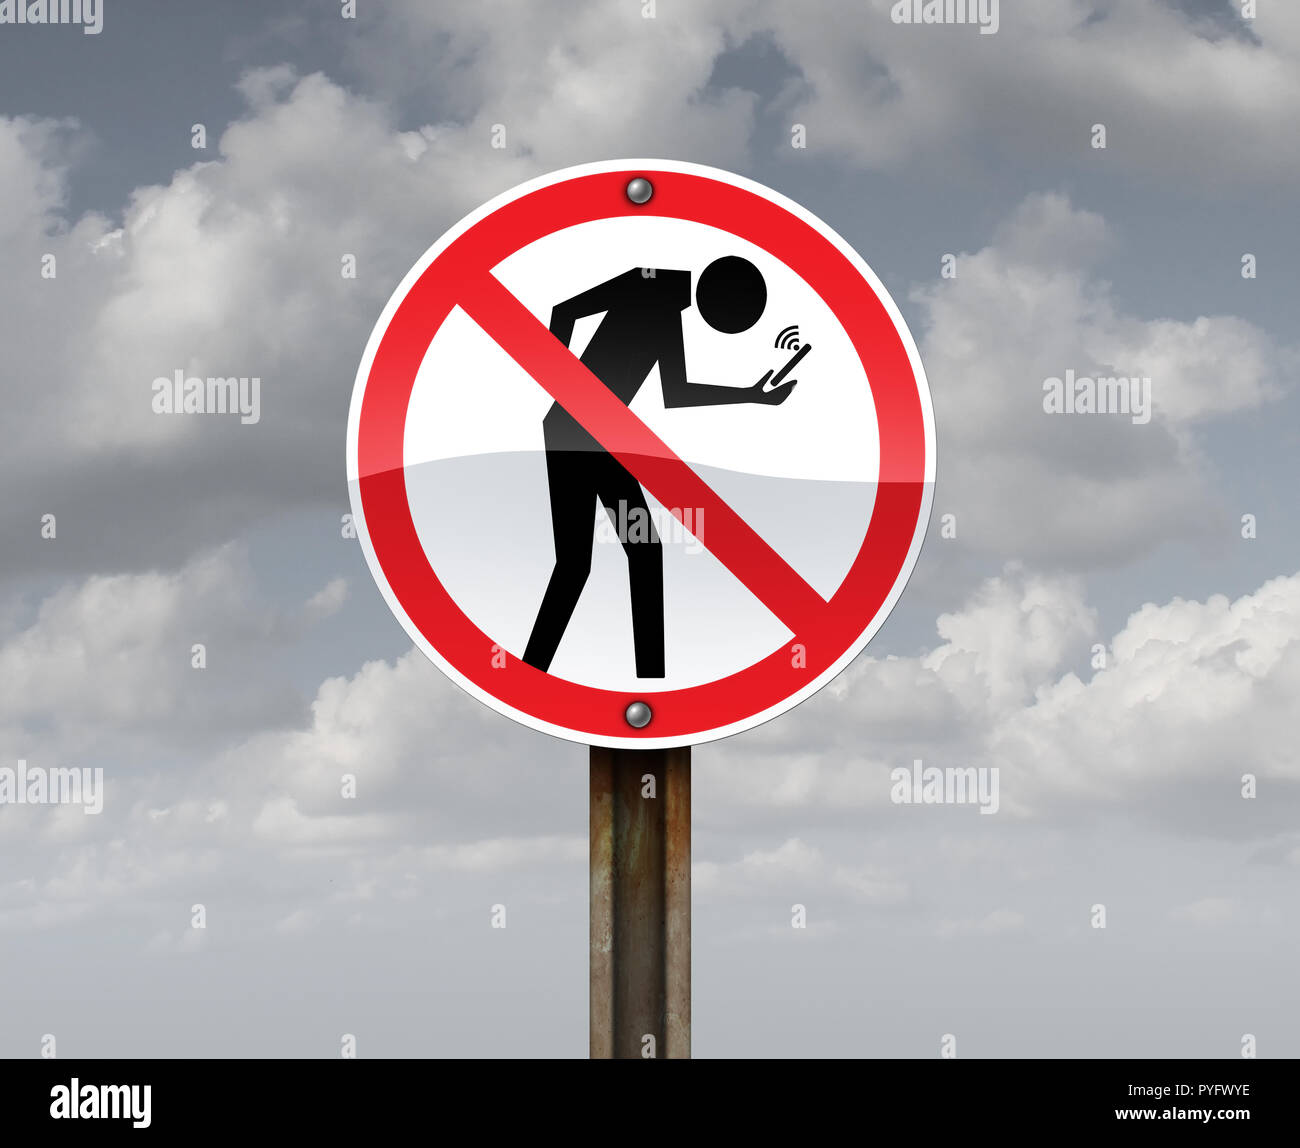 Banning cell phone use and internet addiction holding smartphones or mobile devices as a ban sign with a person hooked on social media. Stock Photo